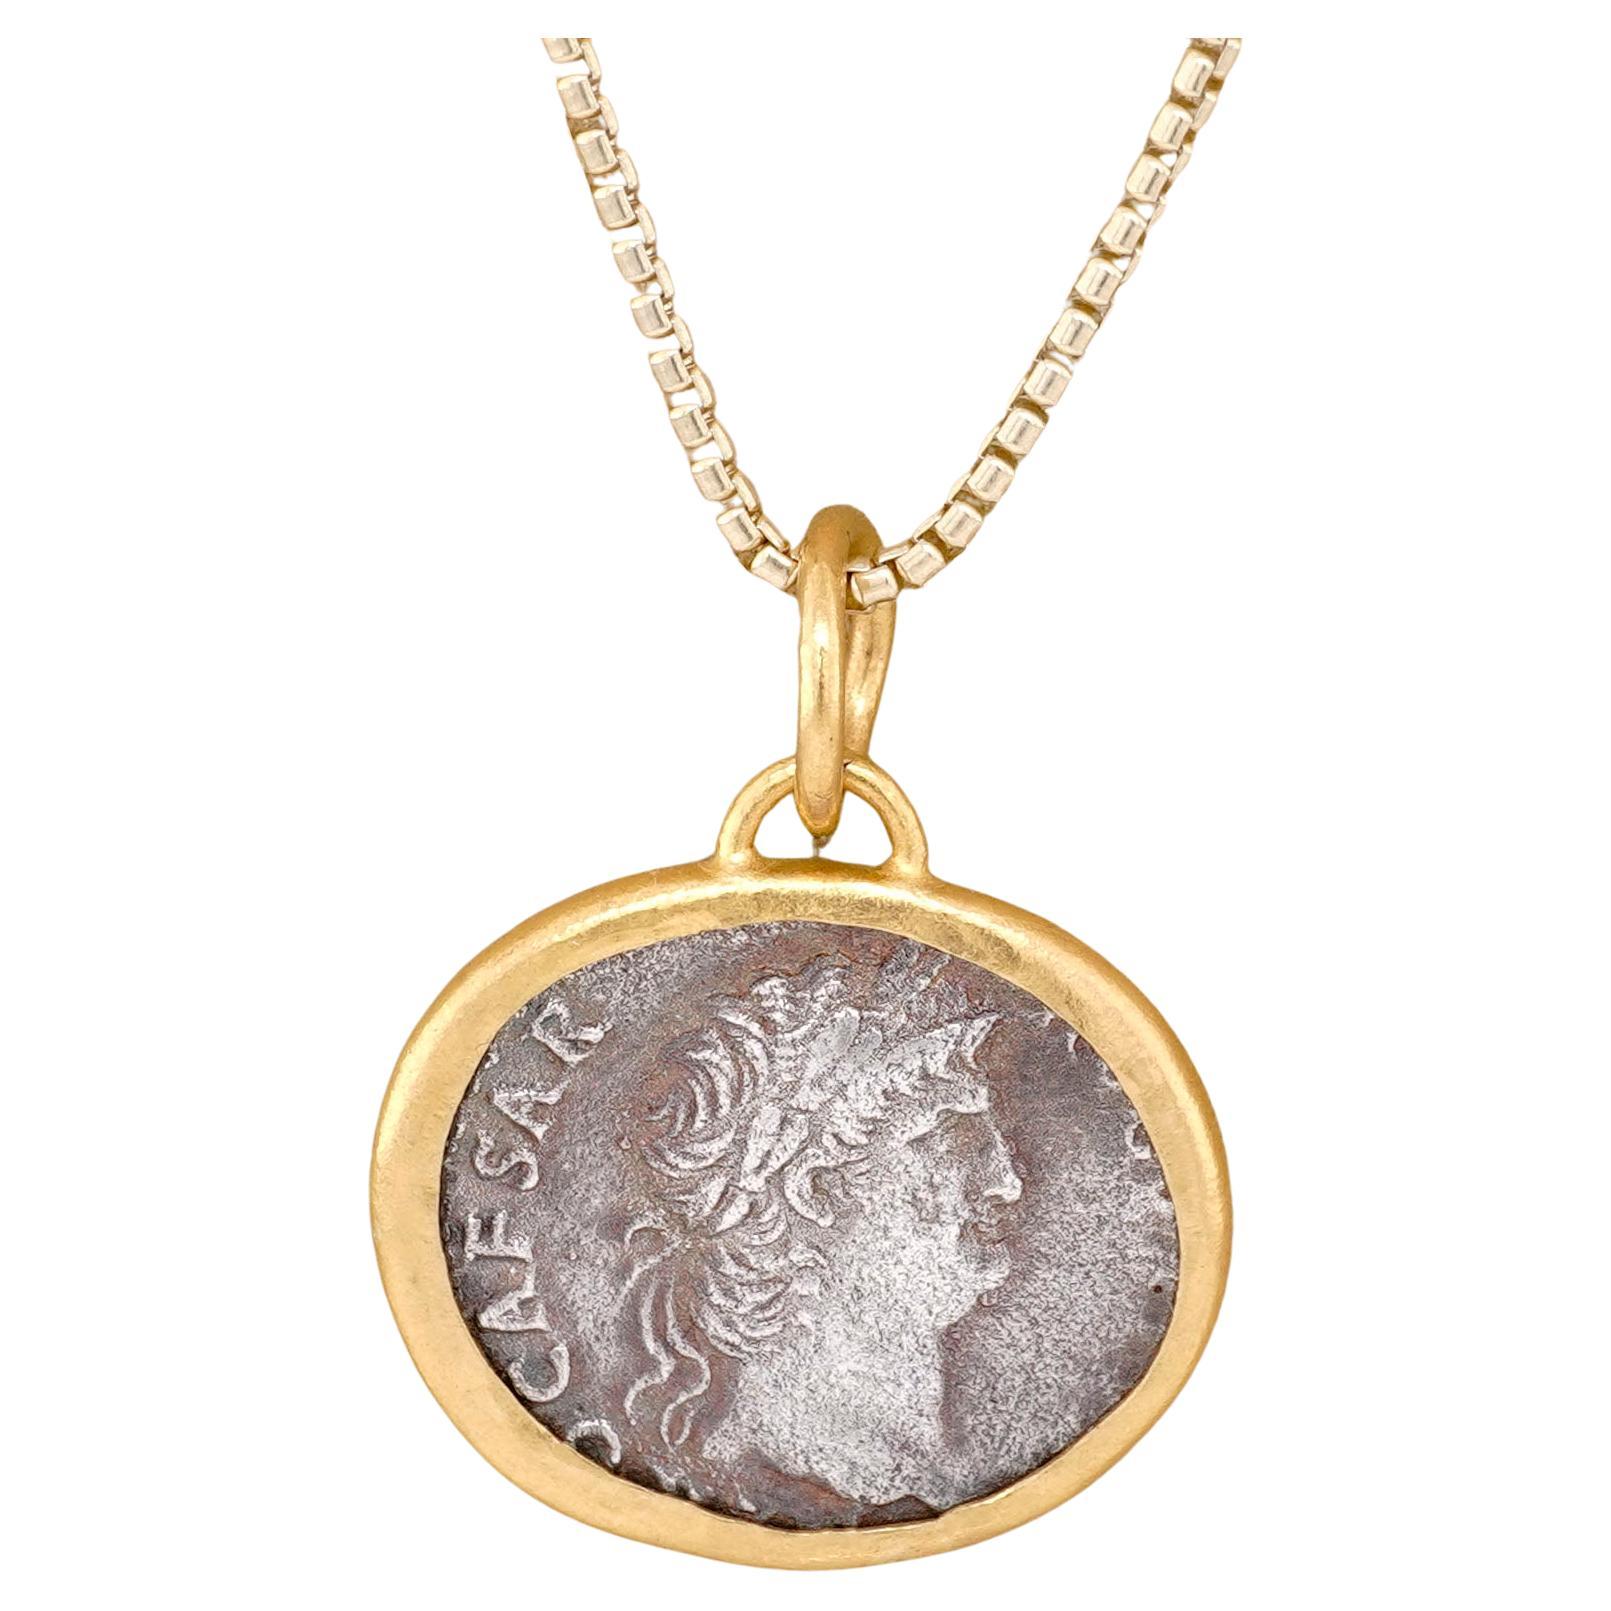 Julius Caesar Coin Replica Amulet Pendant Necklace with 24kt Gold and Silver